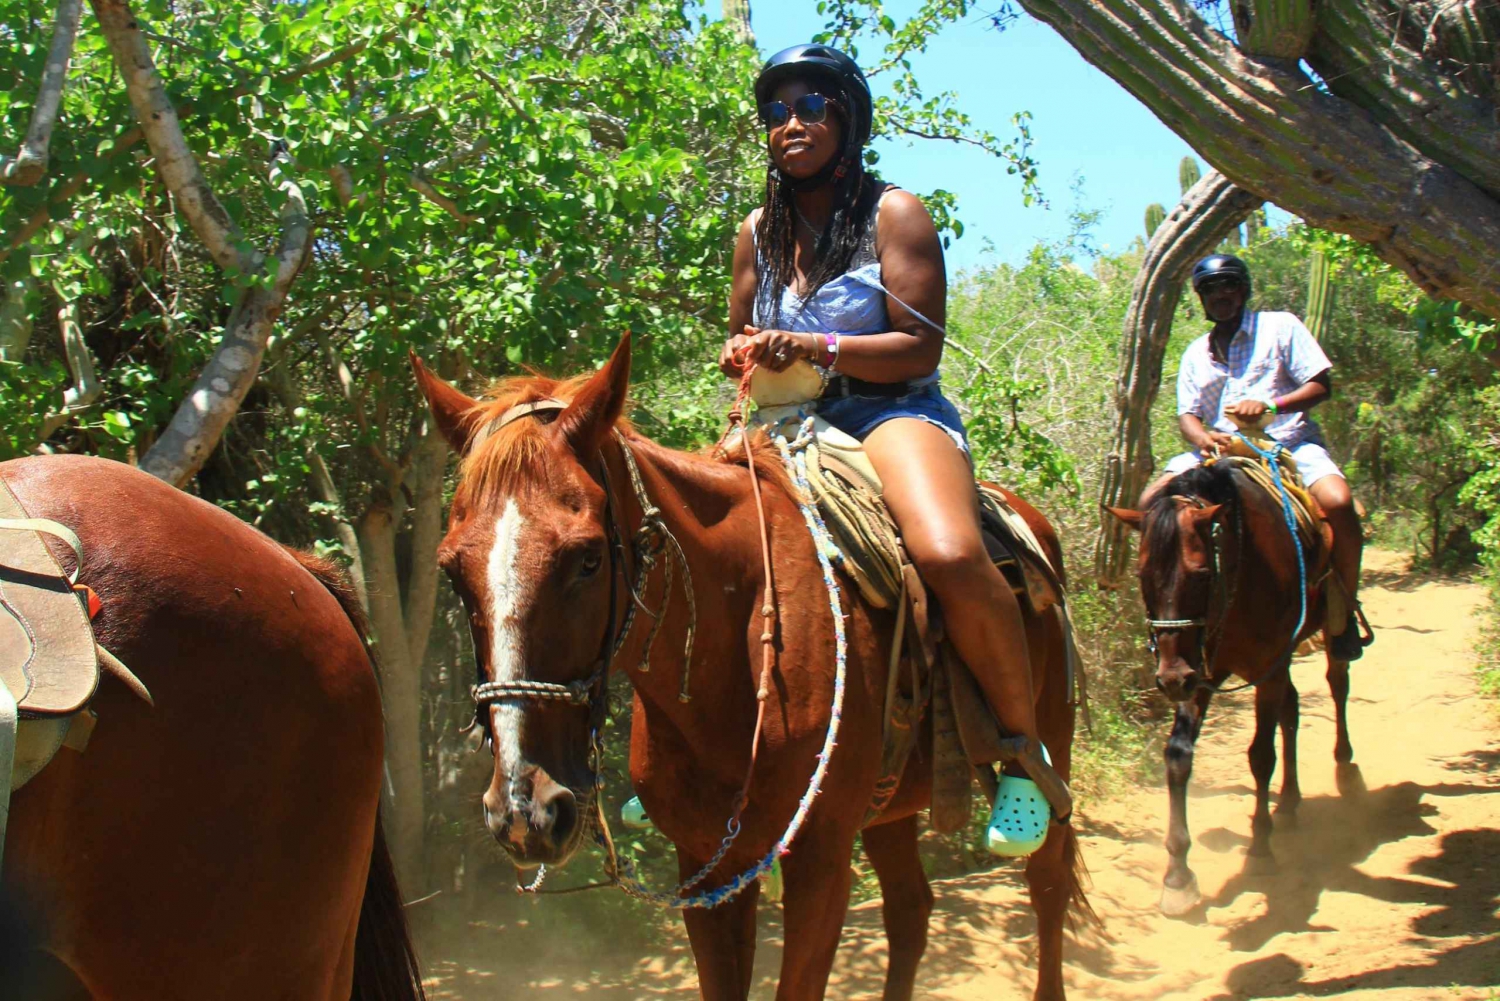 Horseback and UTV Ride on the beach with Tequila Tasting